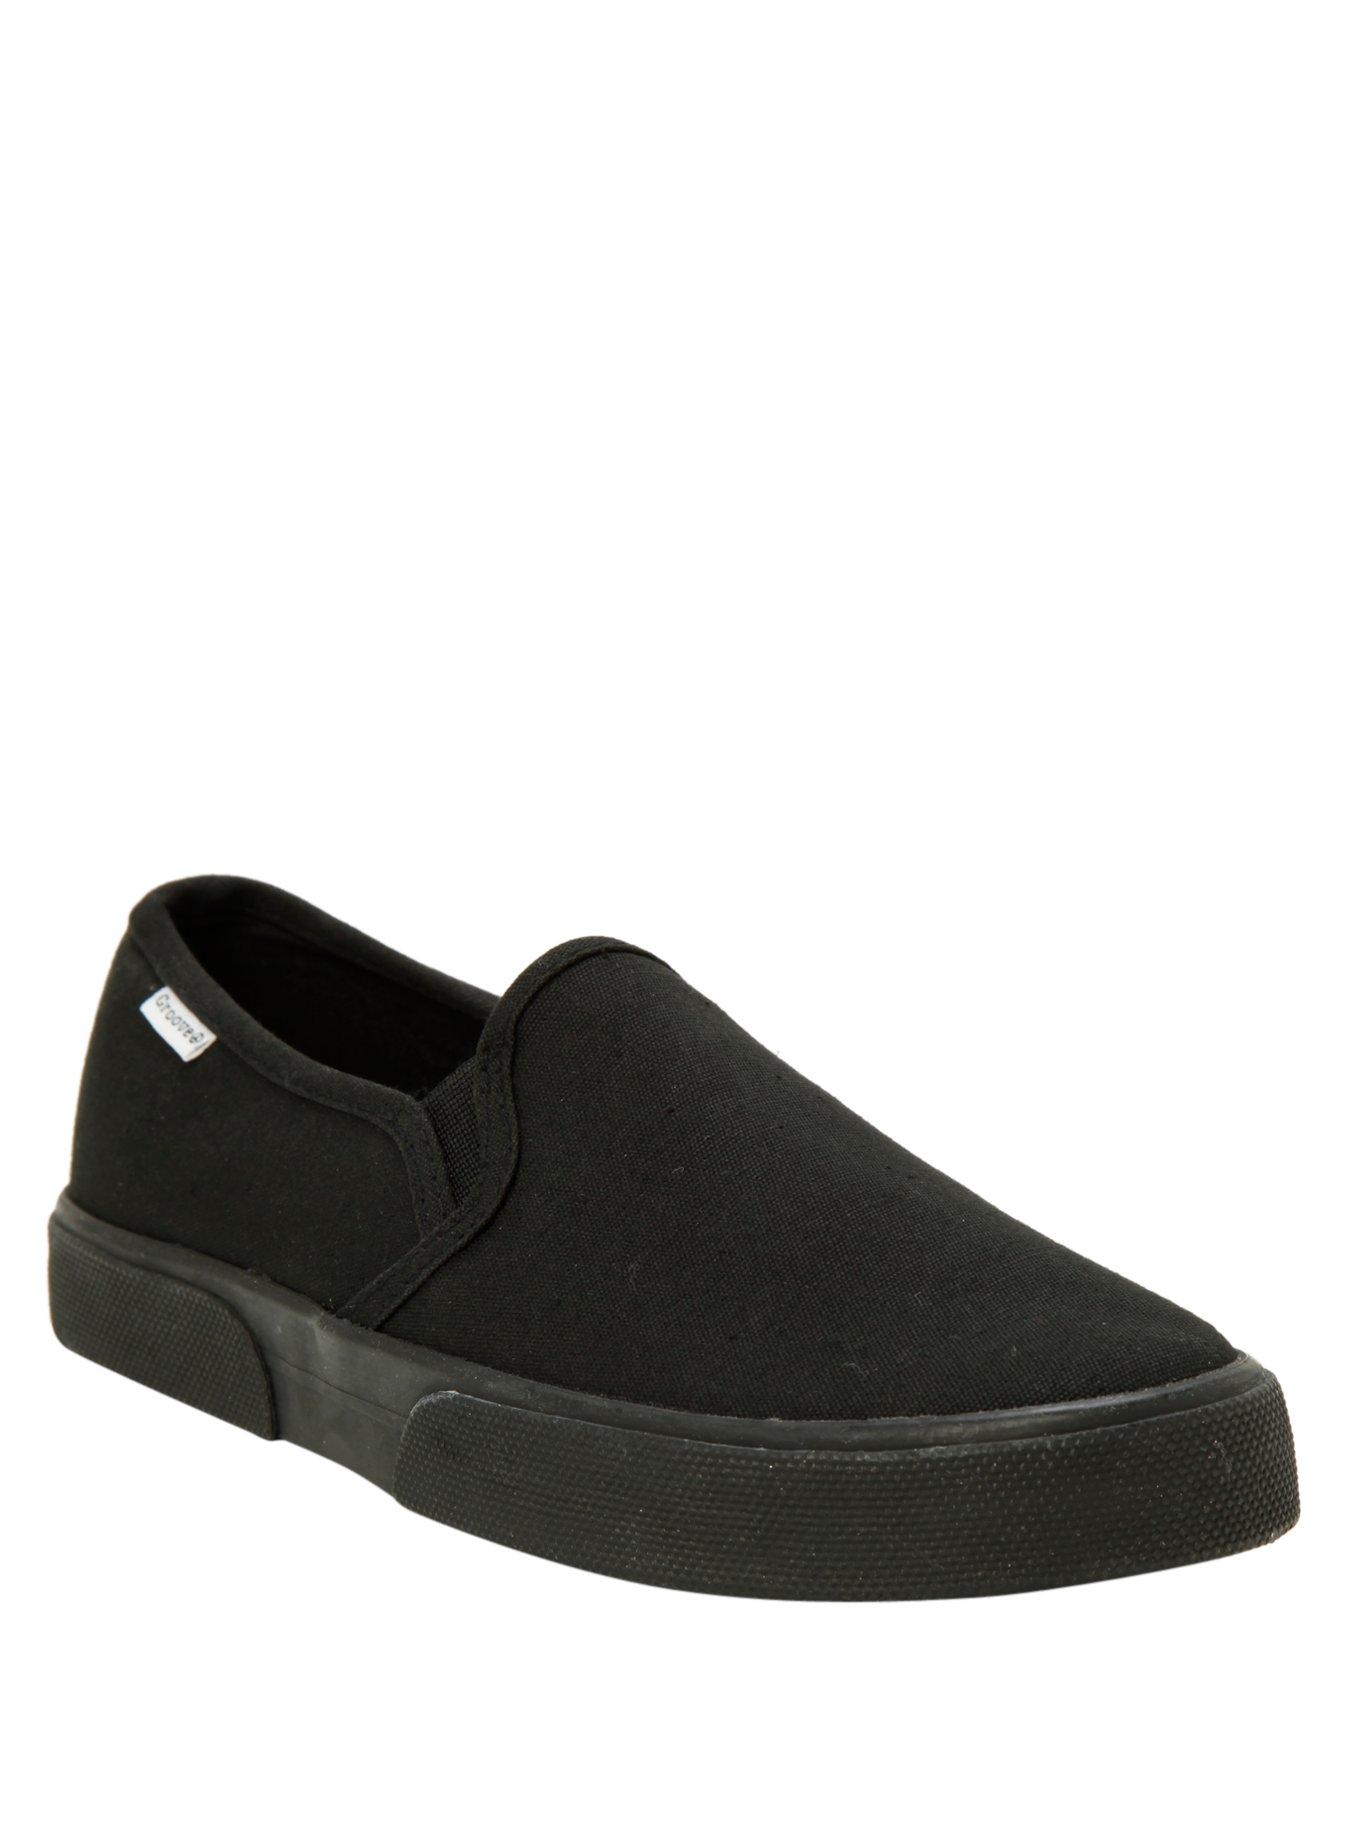 Black Slip-On Shoes | Hot Topic